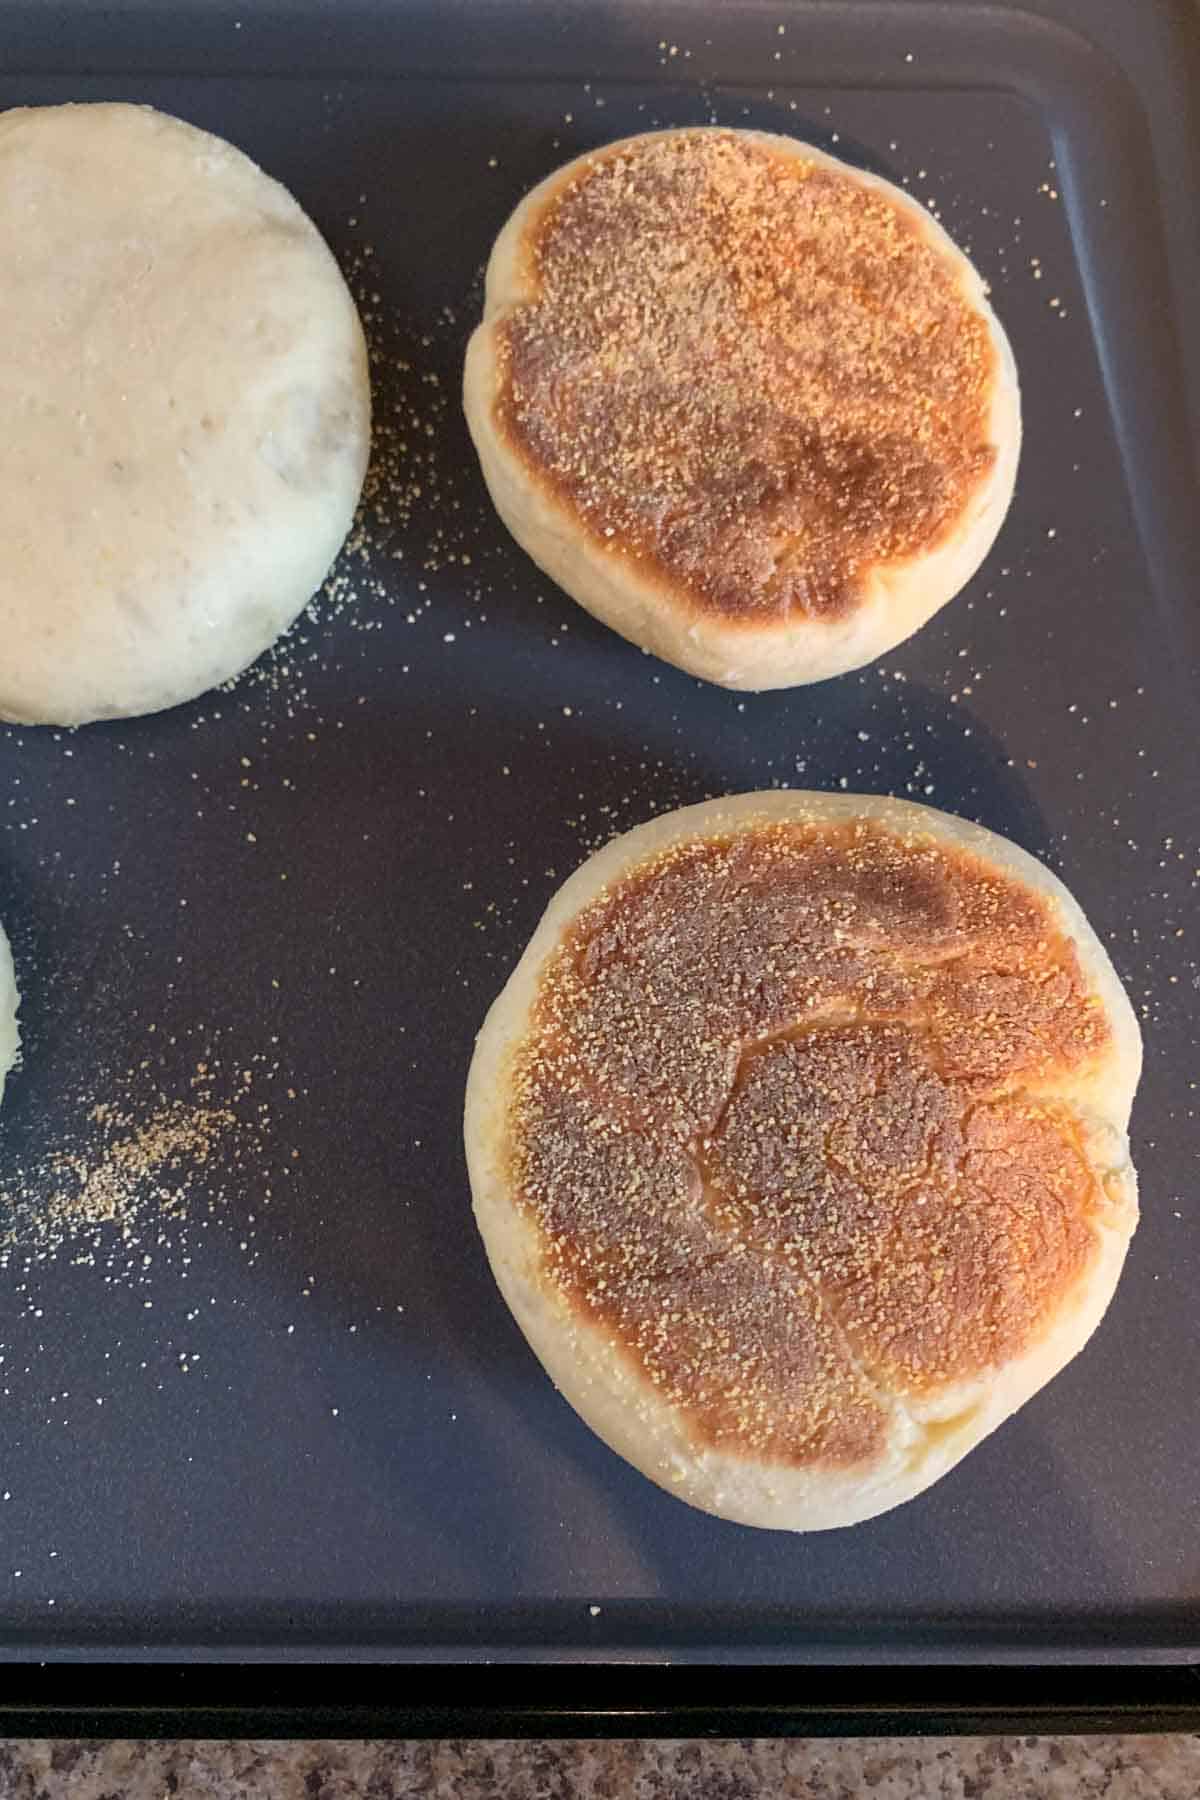 Flipped English muffin on a griddle showing one side baked.